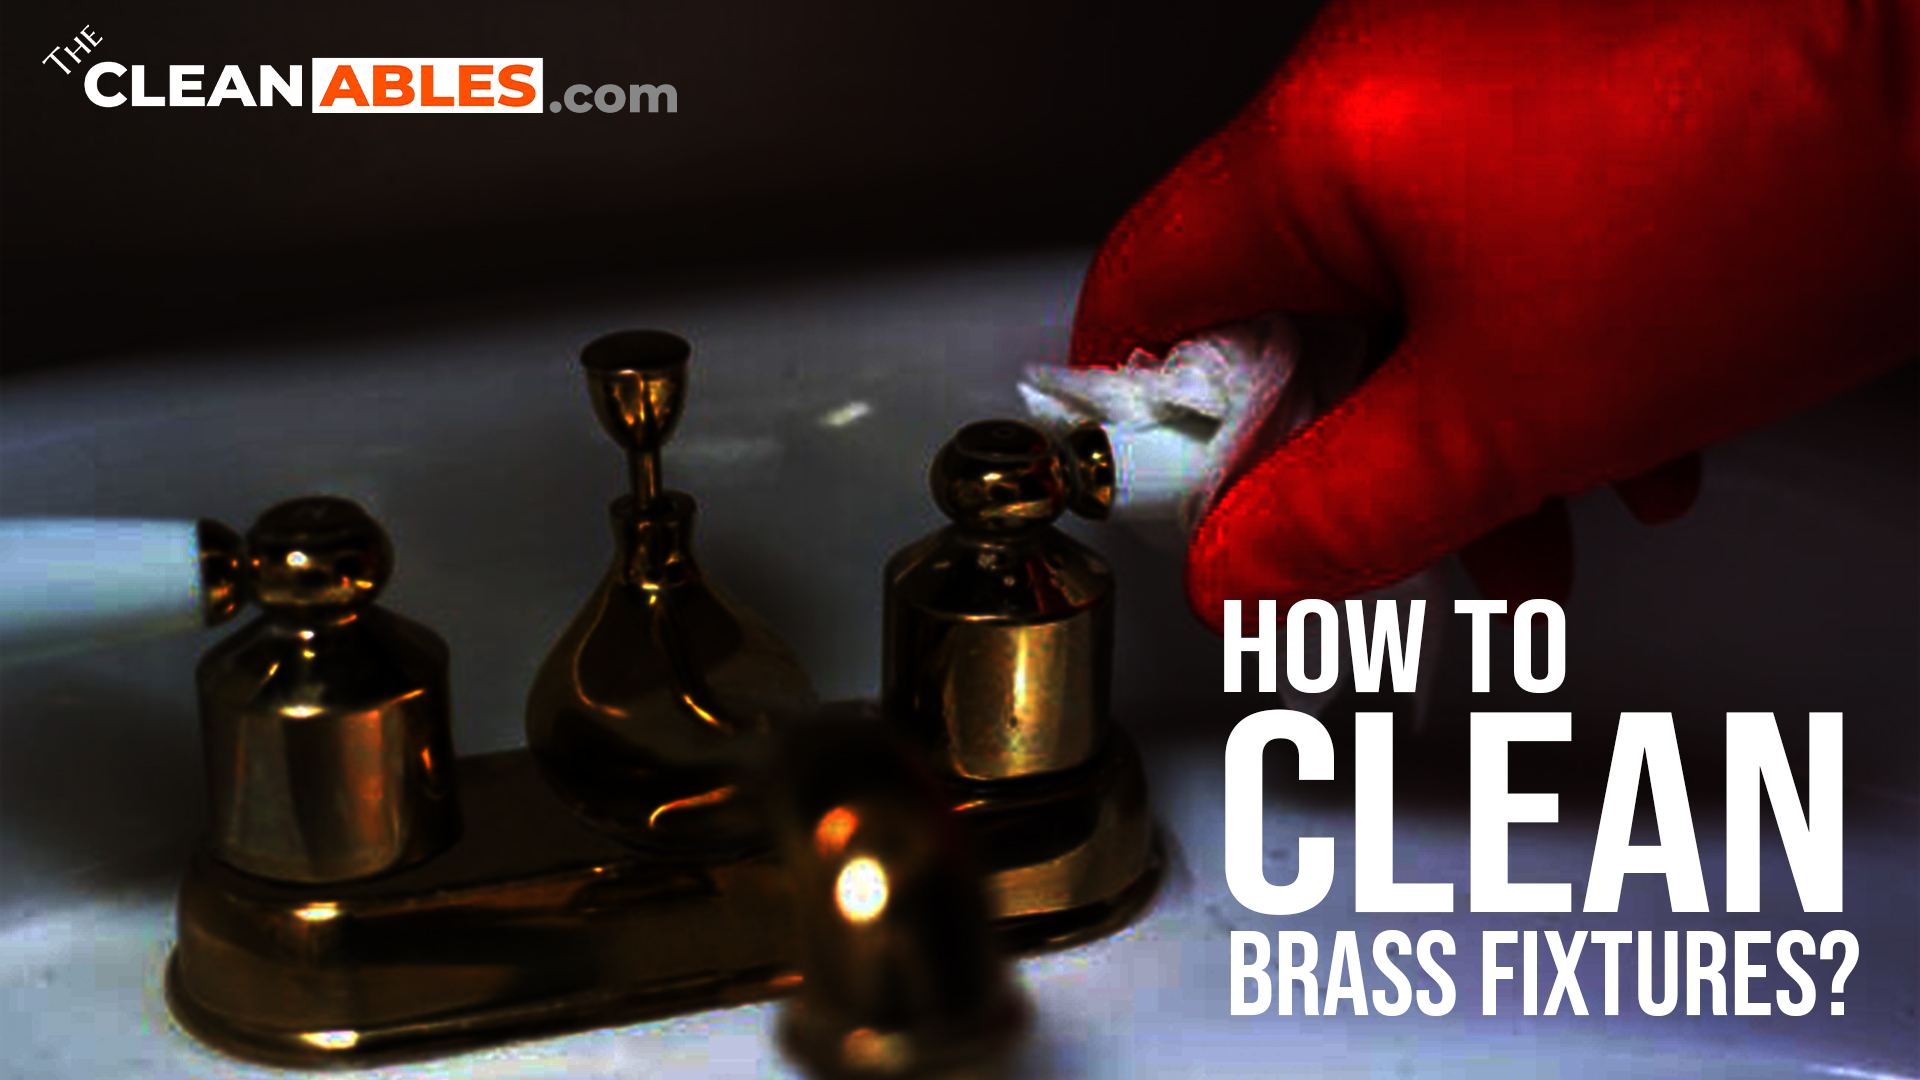 How to Clean Brass Fixtures? - The Cleanables